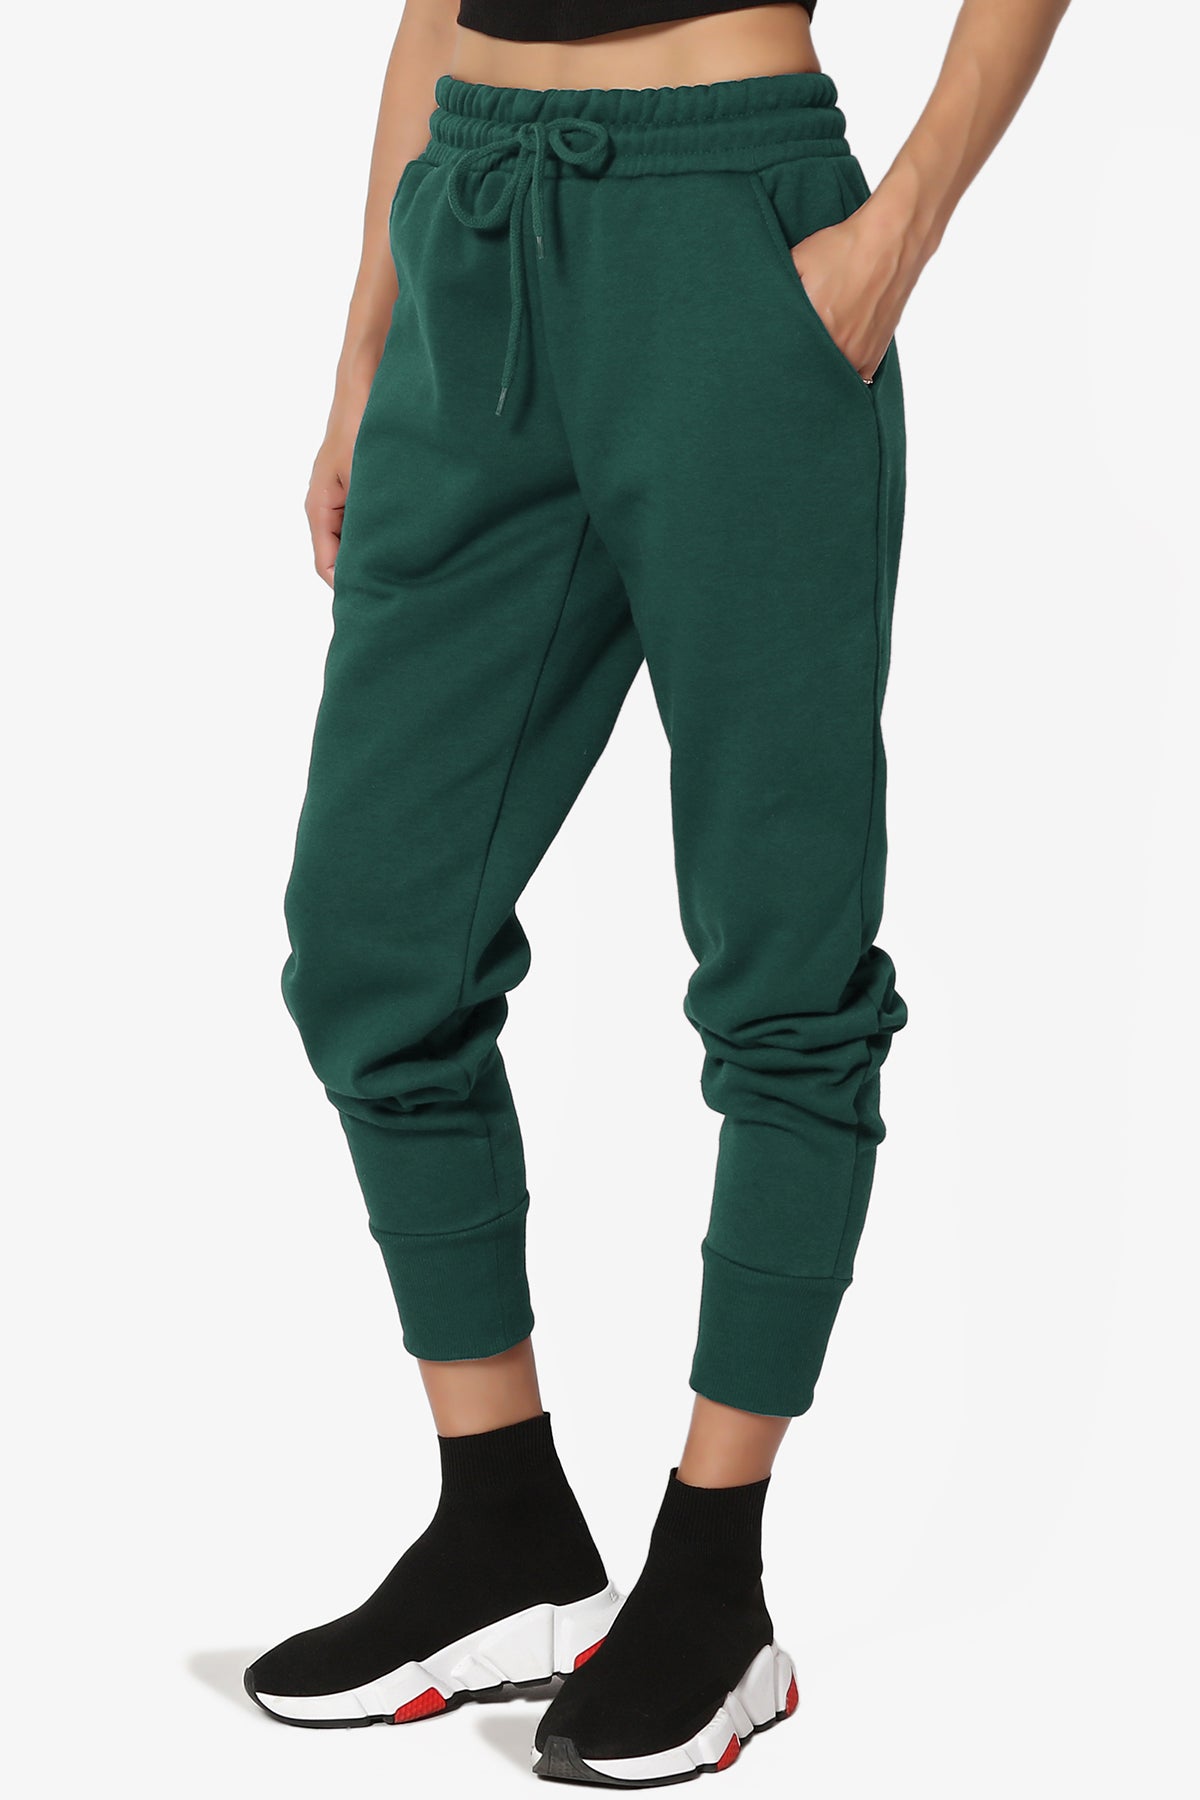  Joggers for Women, Women's Fashion Loose Solid Sweatpants  Drawstring Casual Trousers with Pockets Women's Joggers Black Joggers Women  Womans Sweat Pants Petite Fleece Lounge Jogger (S, Army Green) : Clothing,  Shoes